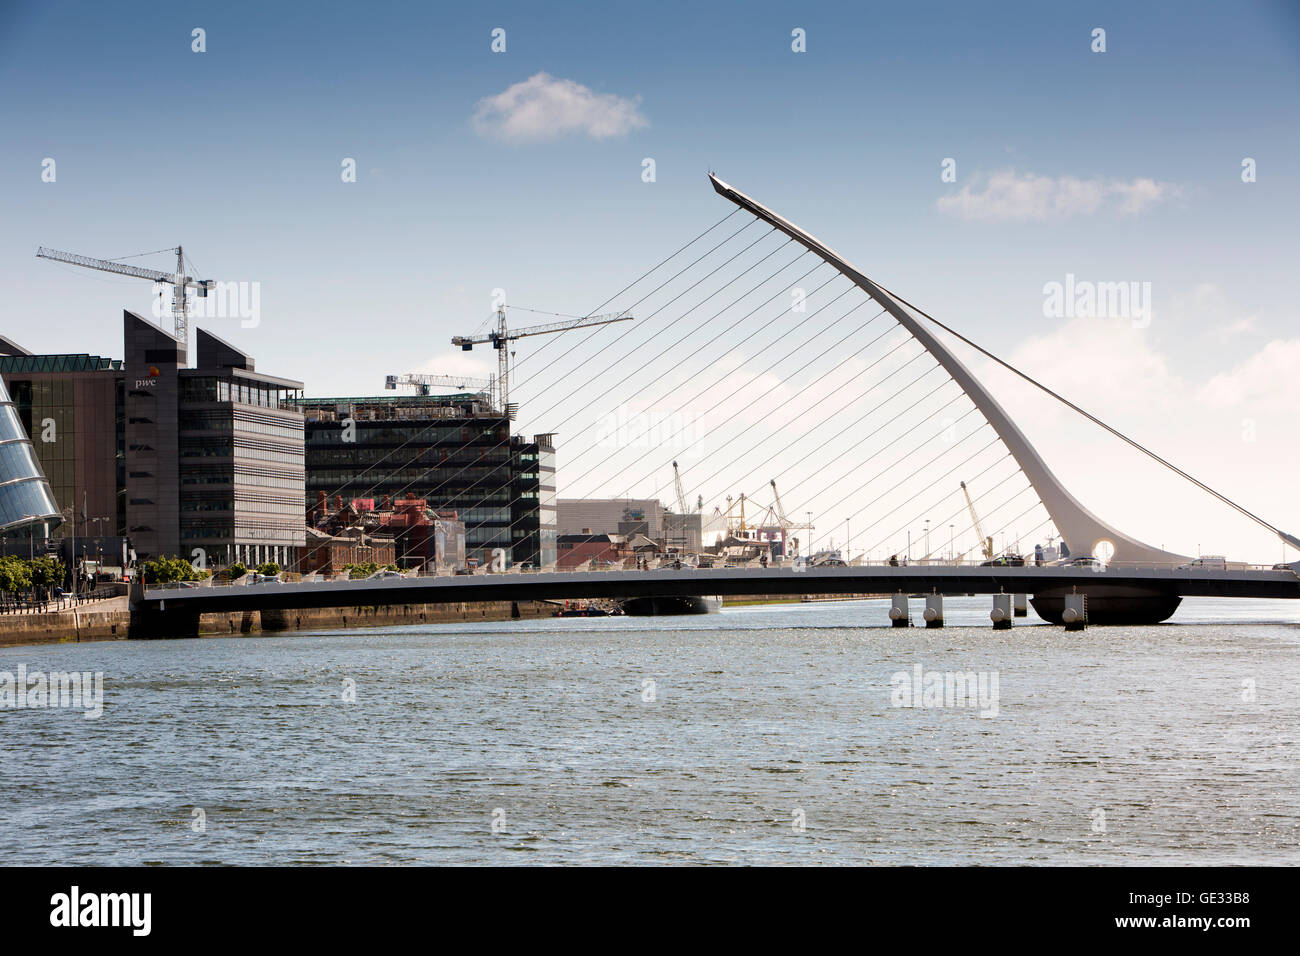 Ireland, Dublin, Samuel Beckett Bridge, 2007 cable stayed crossing over River Liffey in shape of a harp Stock Photo